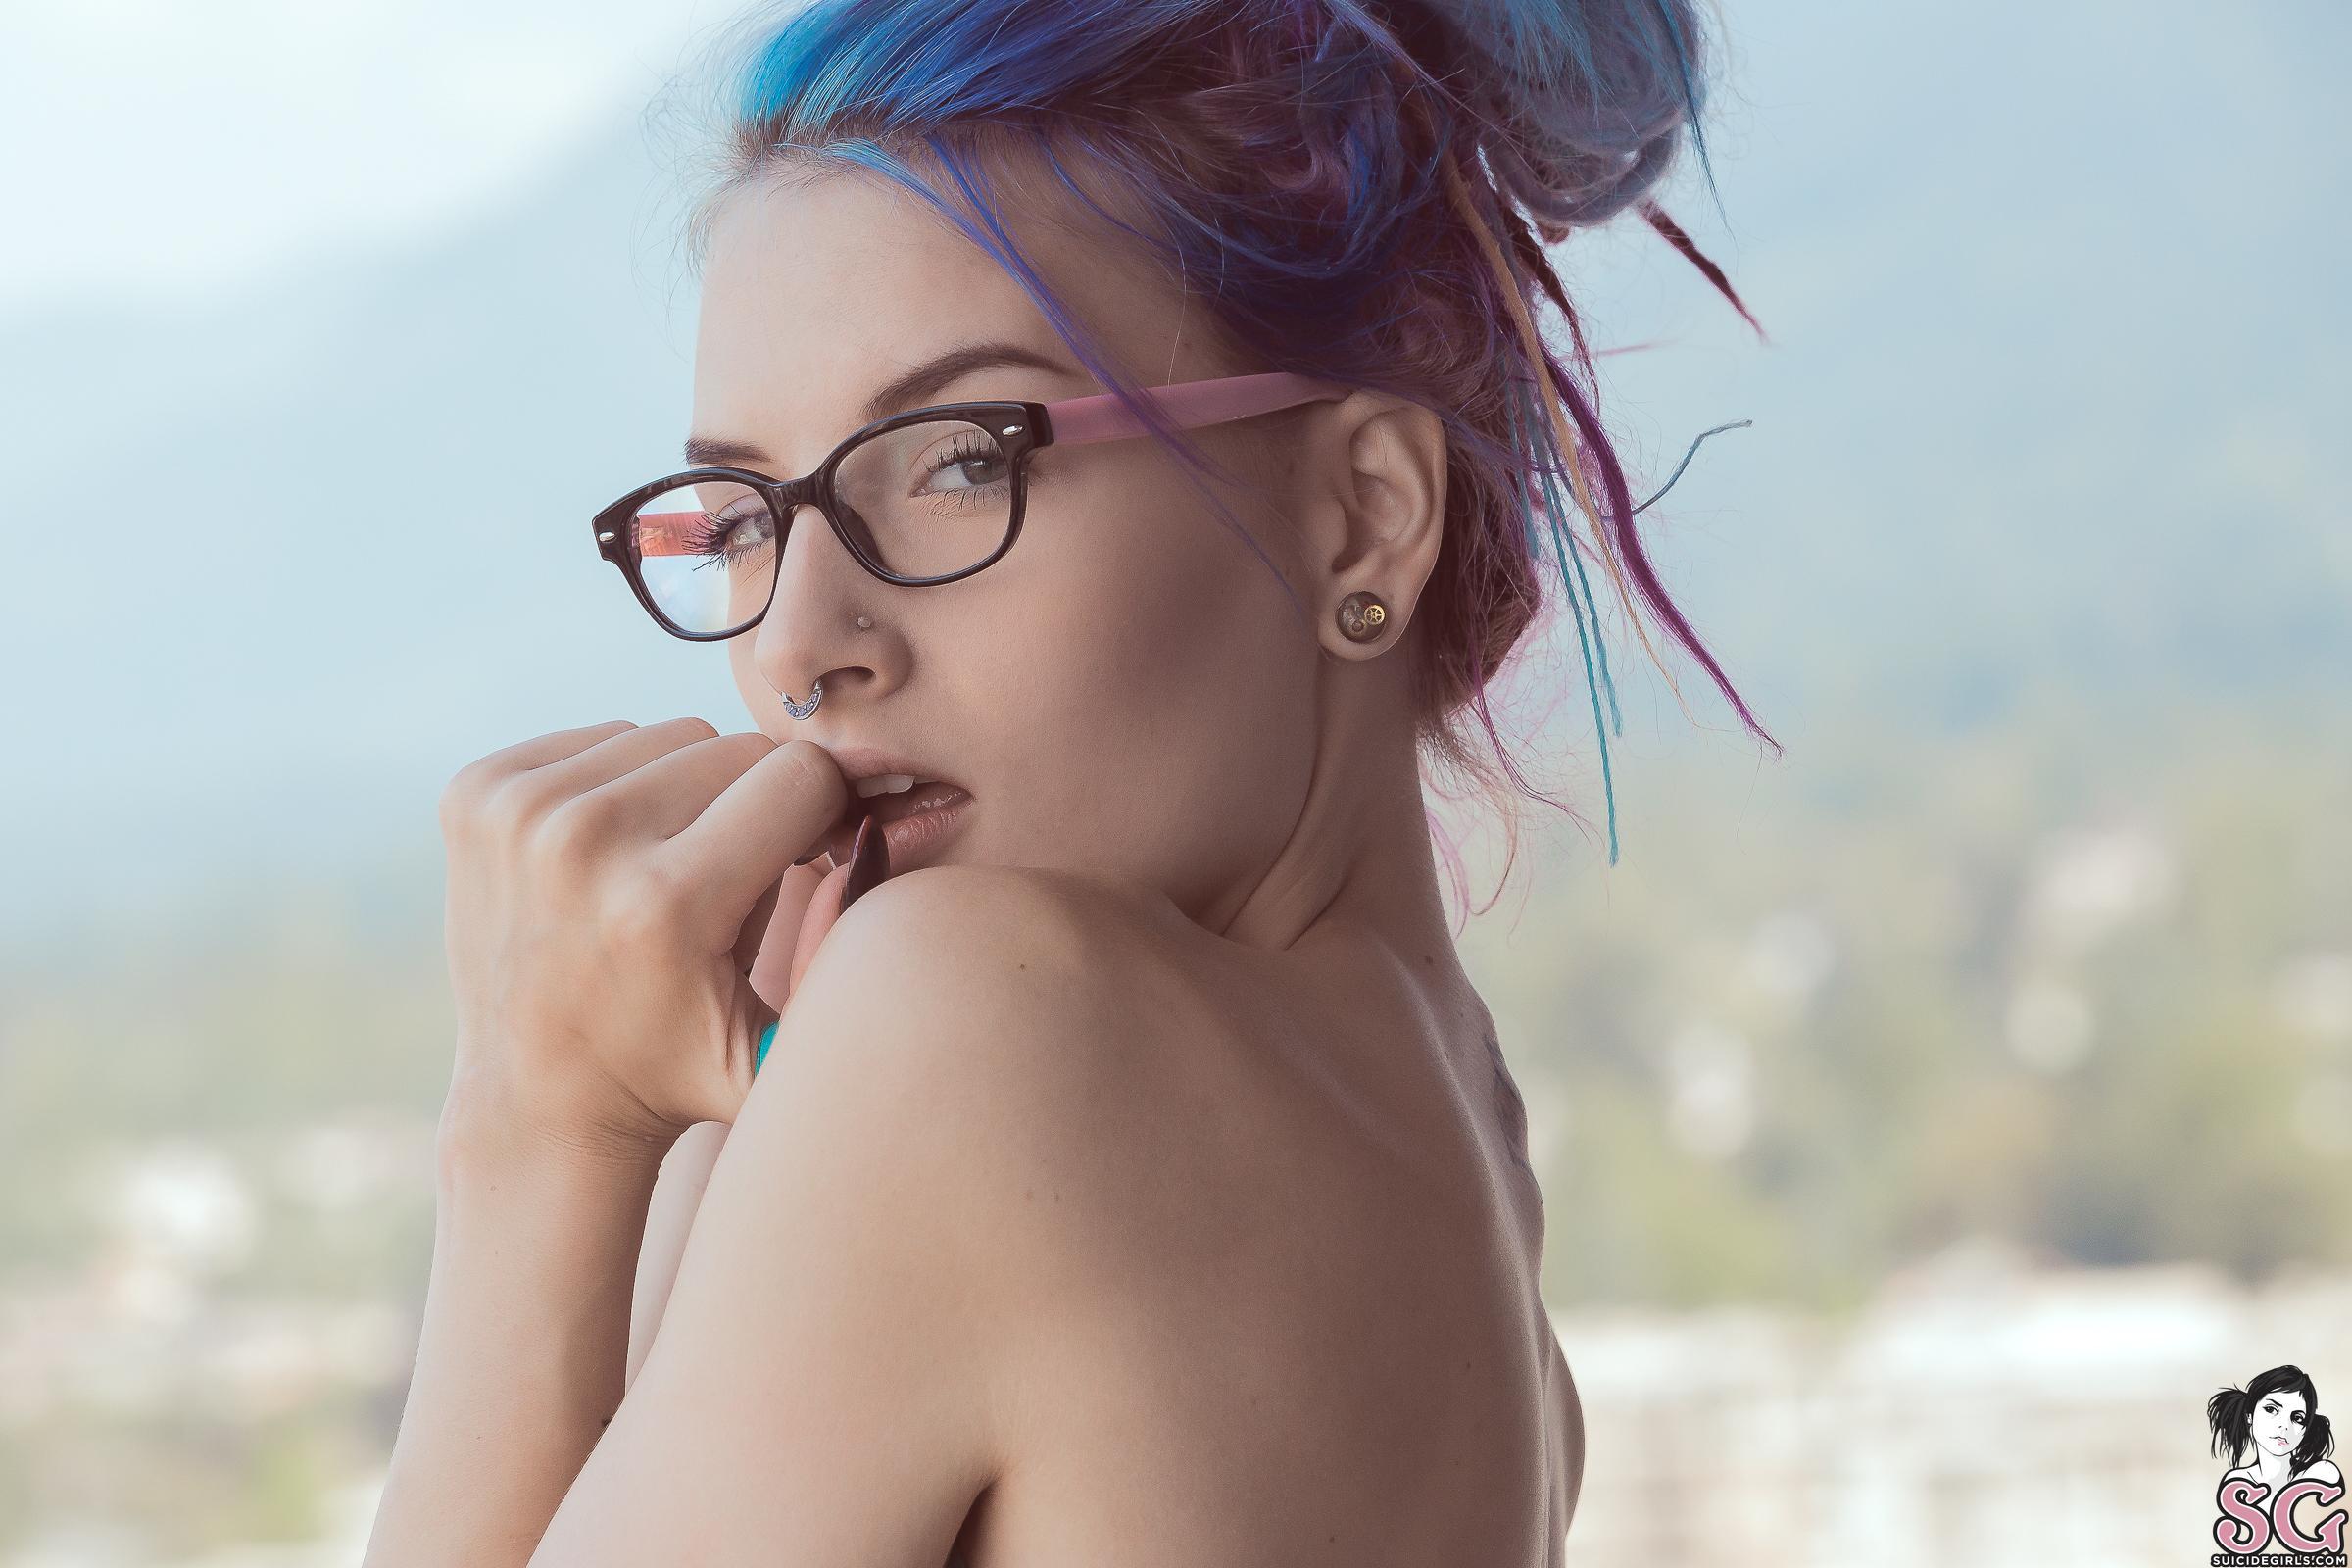 People 2400x1600 Stormyent Suicide model women Suicide Girls face women with glasses piercing sensual gaze